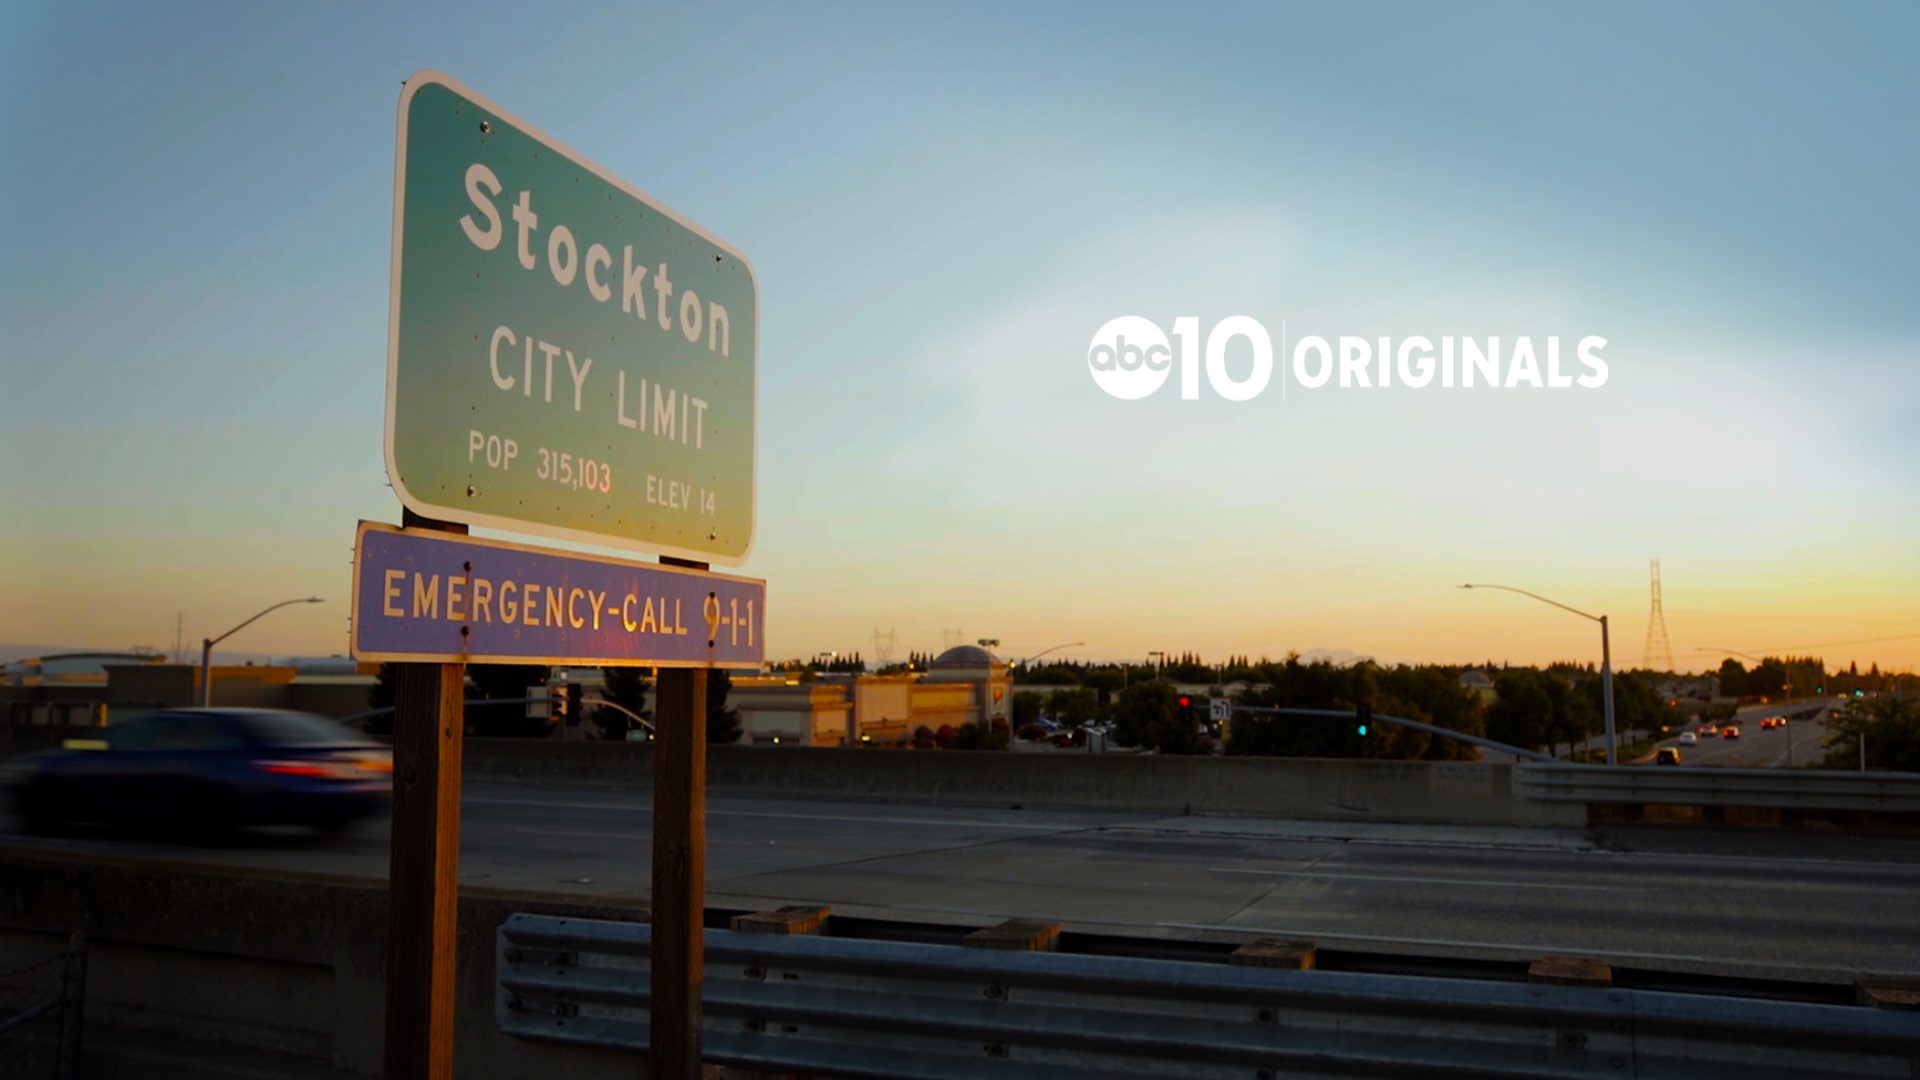 Police in Stockton, California say the majority of the city's violent crime is gang-related, but some disagree. ABC10 takes a closer look.